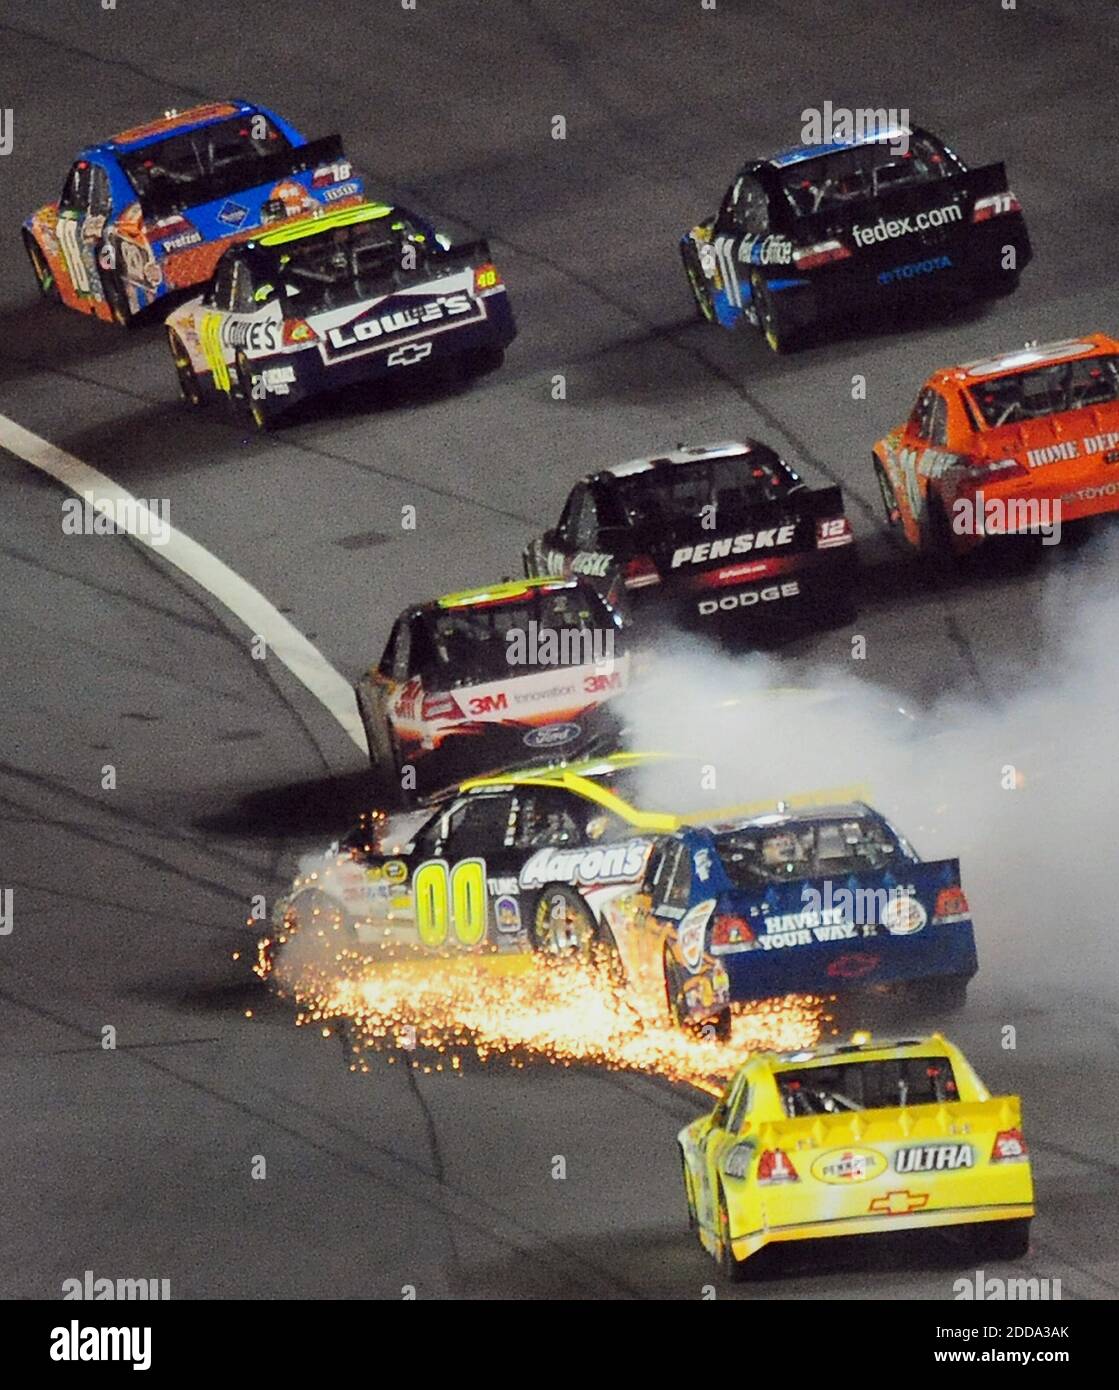 NO FILM, NO VIDEO, NO TV, NO DOCUMENTARY - NASCAR Sprint Cup Series driver David Reutimann (00) kicks up sparks as he and (obscured by smoke) Mark Martin (5) collide going into Turn 1 during the final segment of the NASCAR Sprint All-Star Race at Charlotte Motor Speedway in Charlotte, NC, USA on May 22, 2010. Below, David Reutimann (00) and Tony Stewart (14) collide. Phnoto by Jeff Siner/Charlotte Observer/MCT/Cameleon/ABACAPRESS.COM Stock Photo